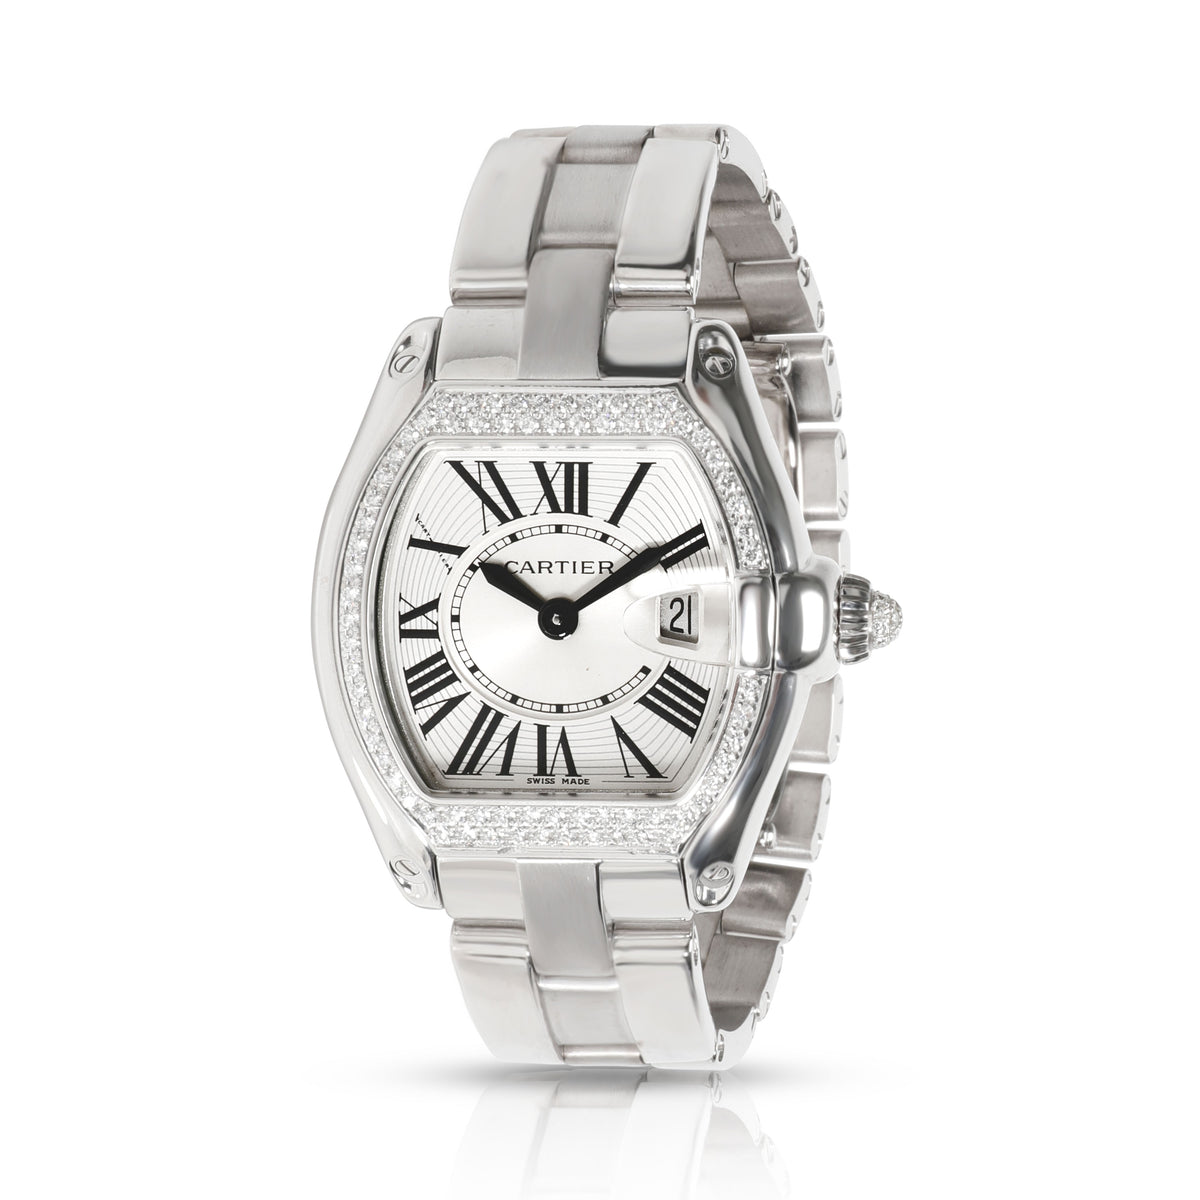 Cartier Roadster WE5002X2 Unisex Watch in 18kt White Gold